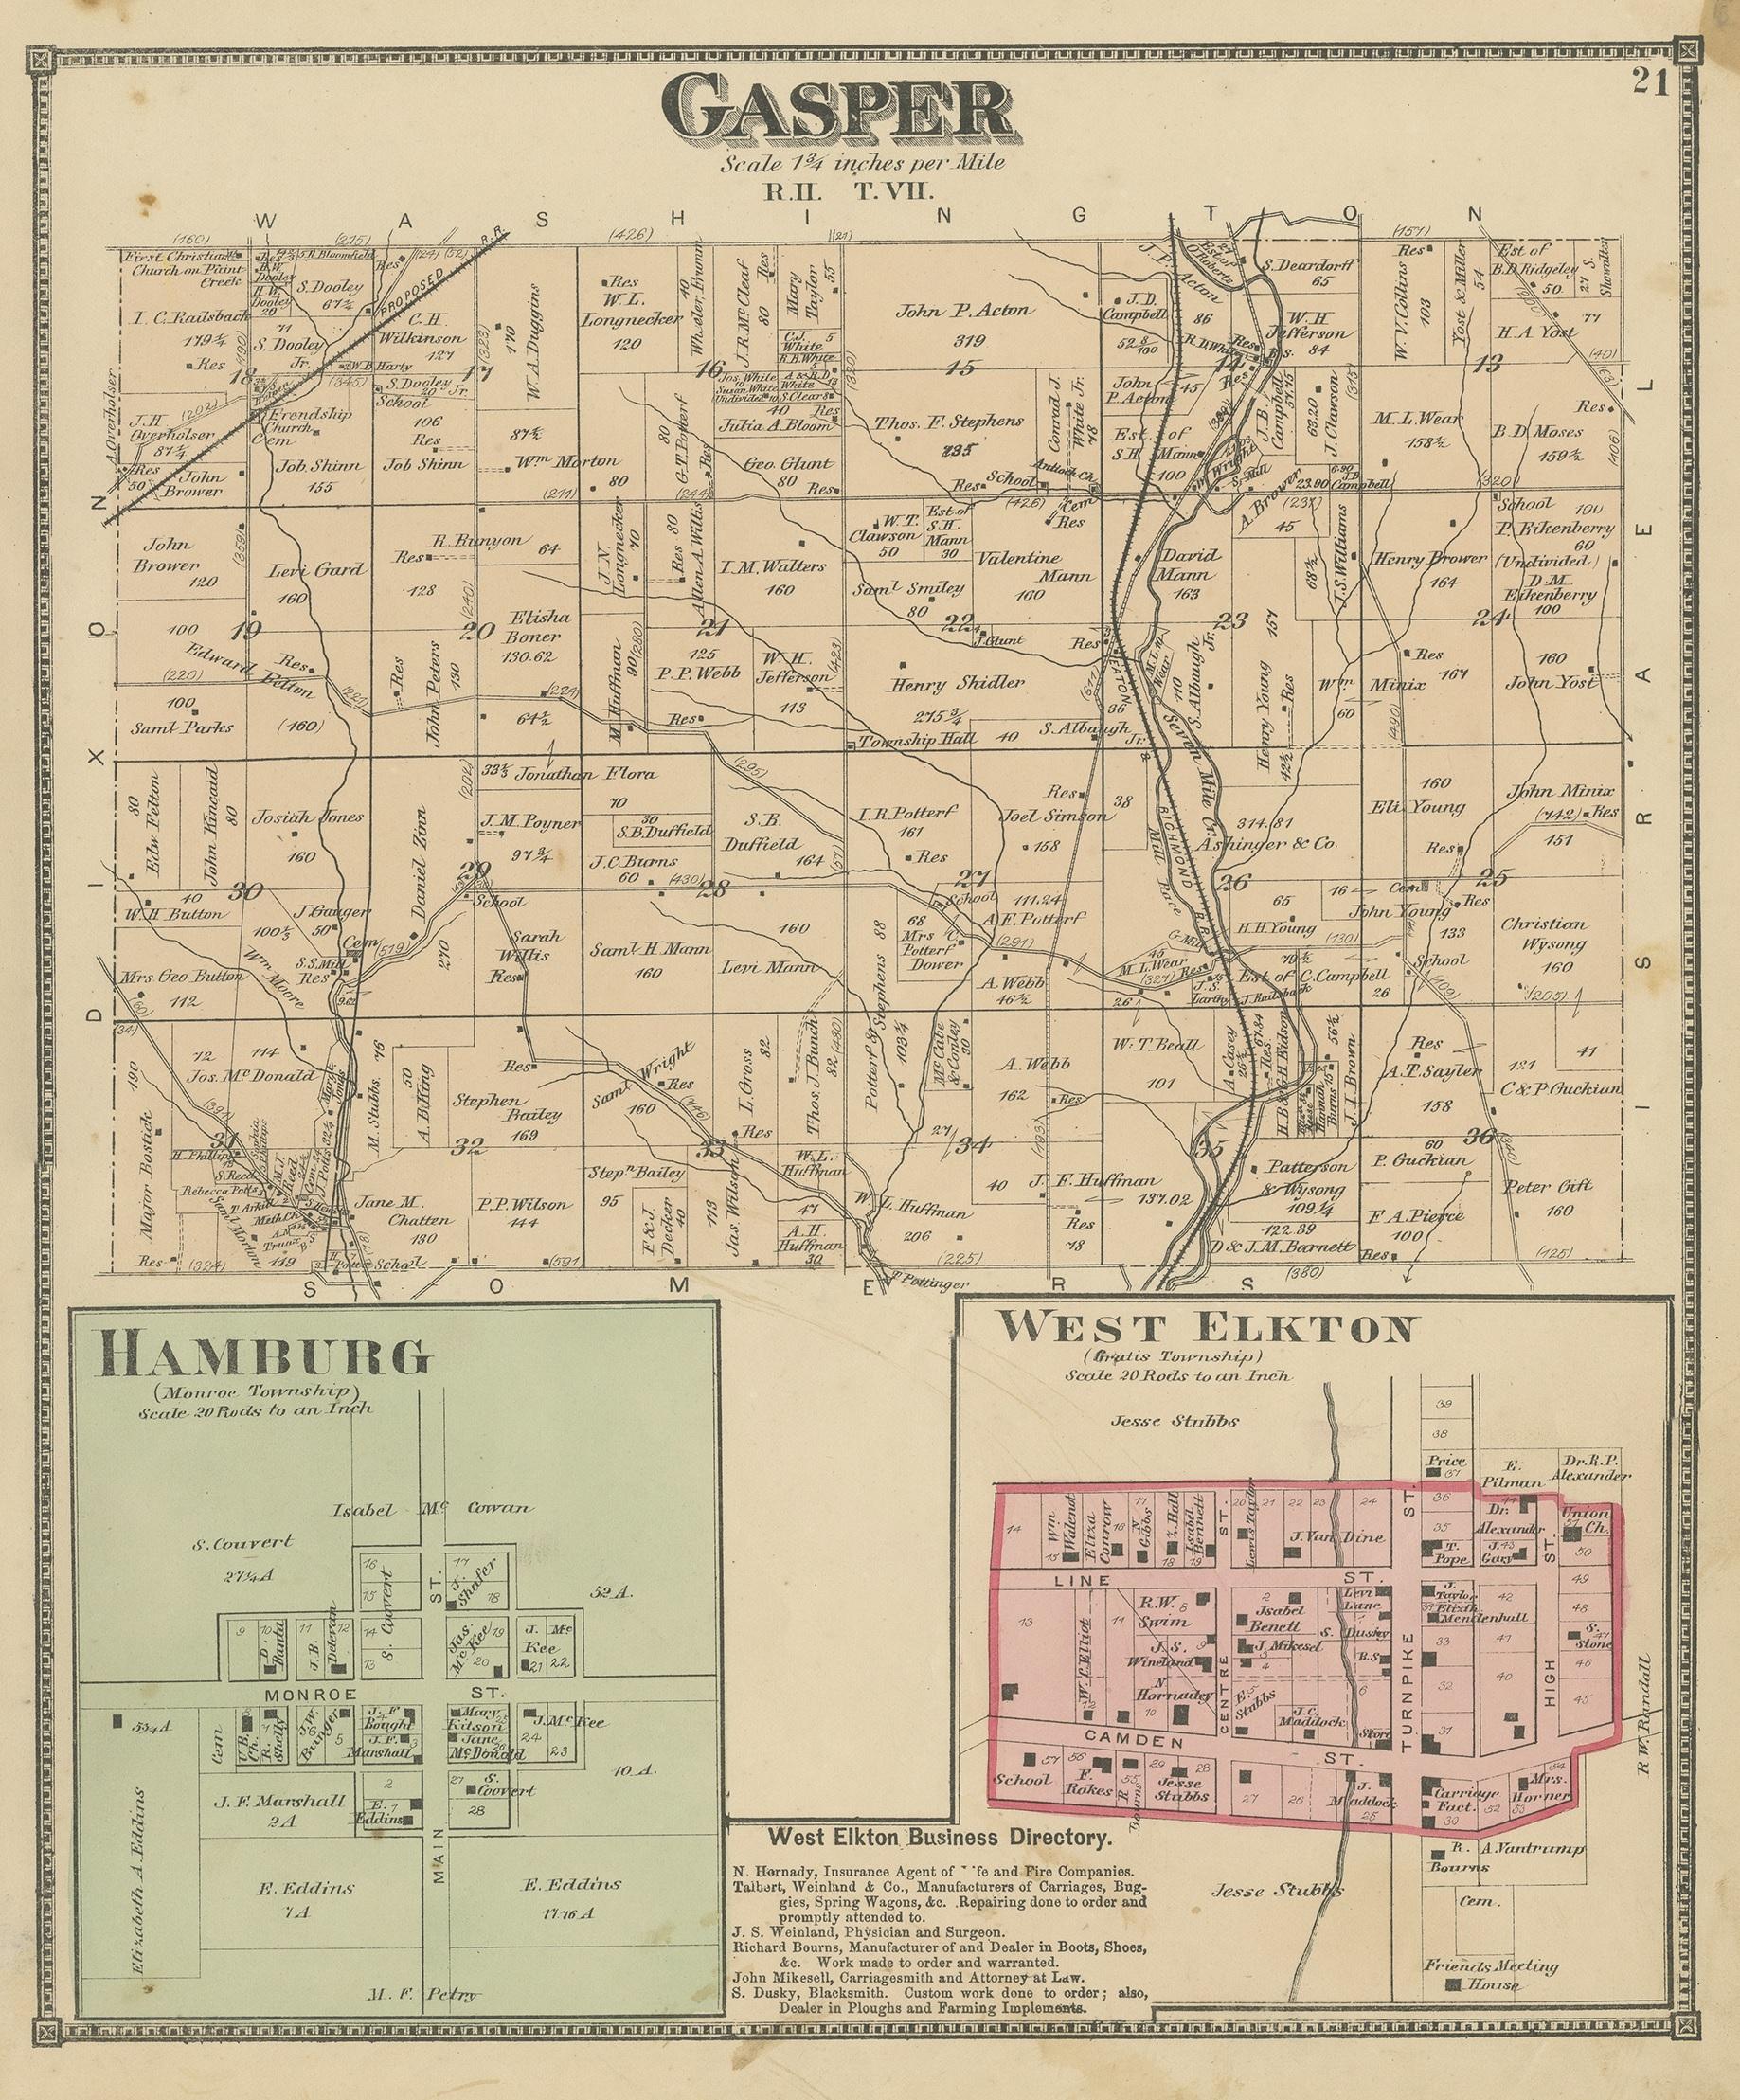 Antique map titled 'Gasper, Hamburg, West Elkton'. Original antique map of villages and communities of Ohio. This map originates from 'Atlas of Preble County Ohio' by C.O. Titus. Published 1871.